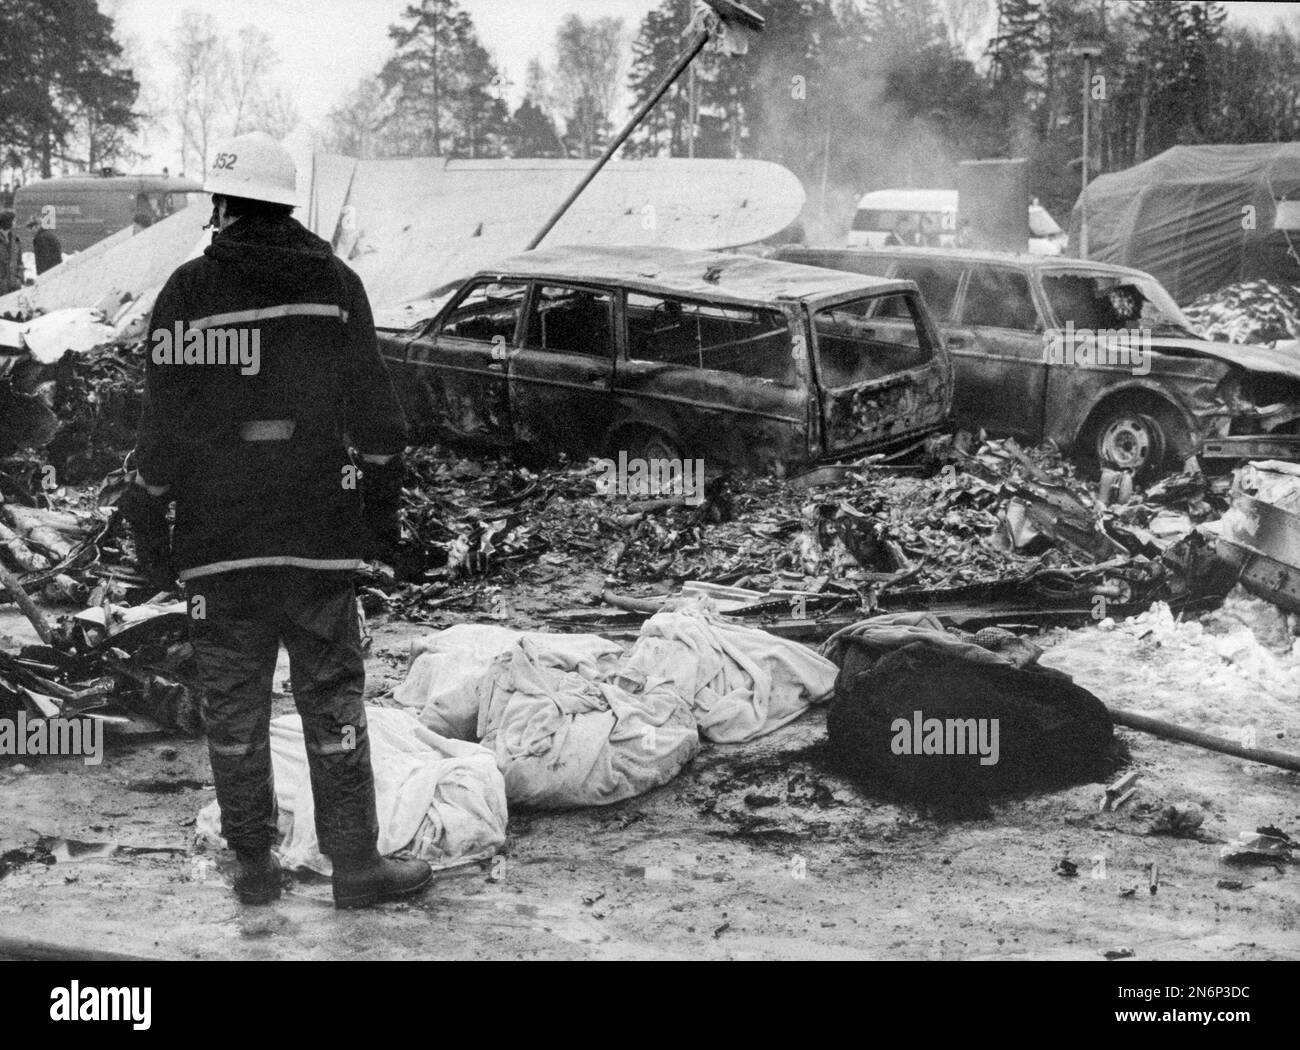 One of the worst aviation accidents in Sweden happened when an airliner crashed into a townhouse area in western Stockholm 1977.The accident was caused by atmosperic icing. Stock Photo